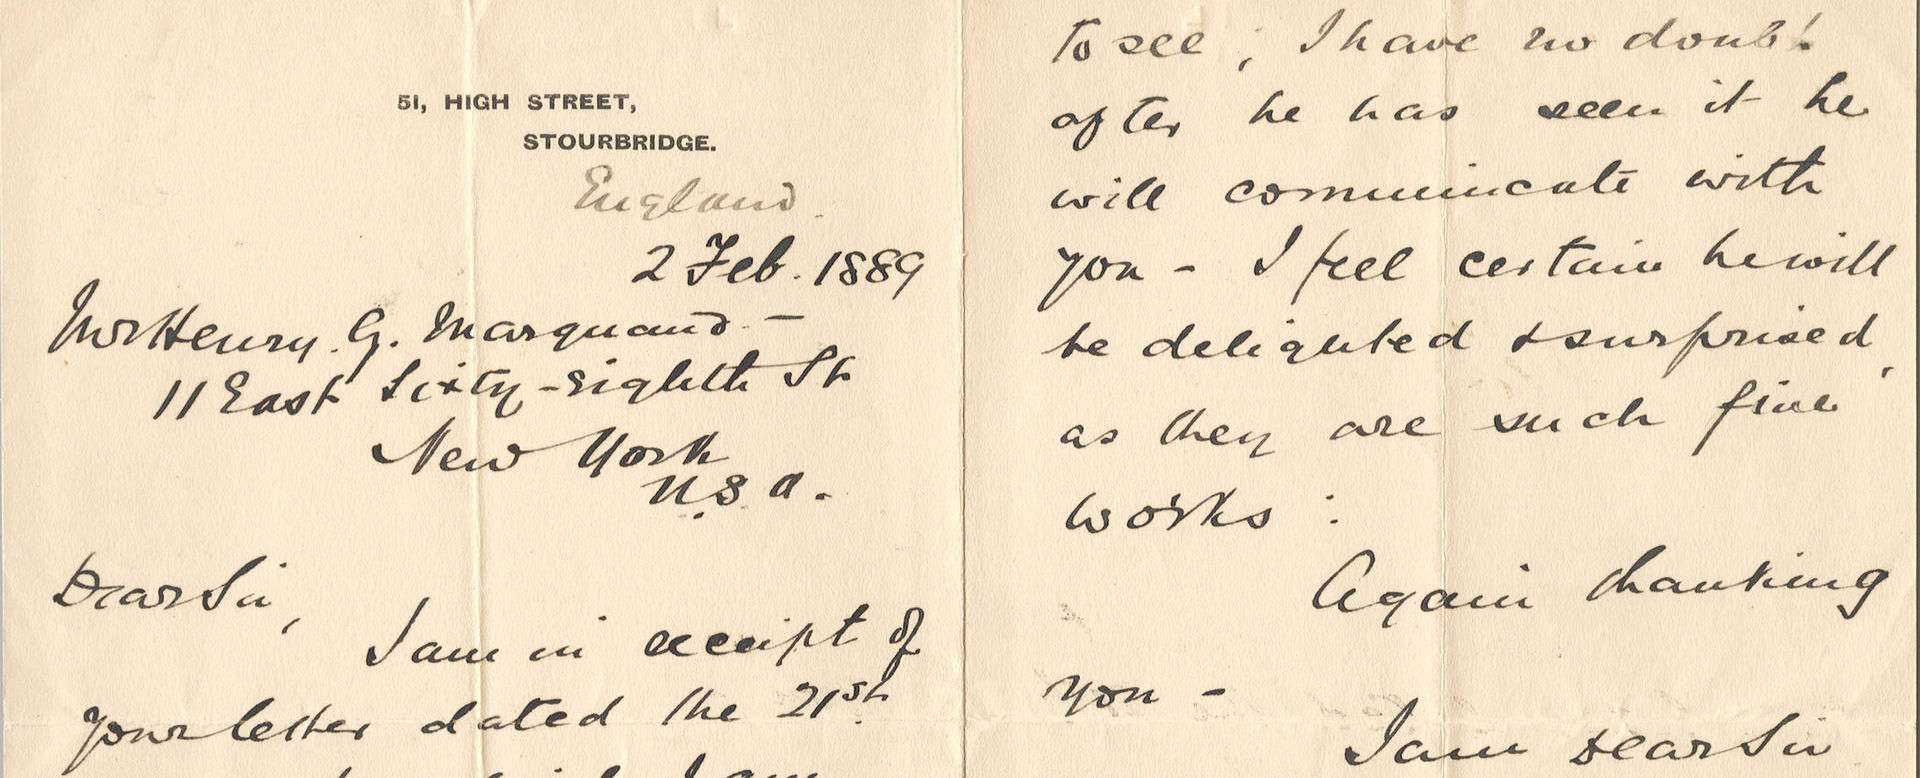 Detail of a handwritten letter dated 2 Feb 1889 and addressed to Henry G. Marquand